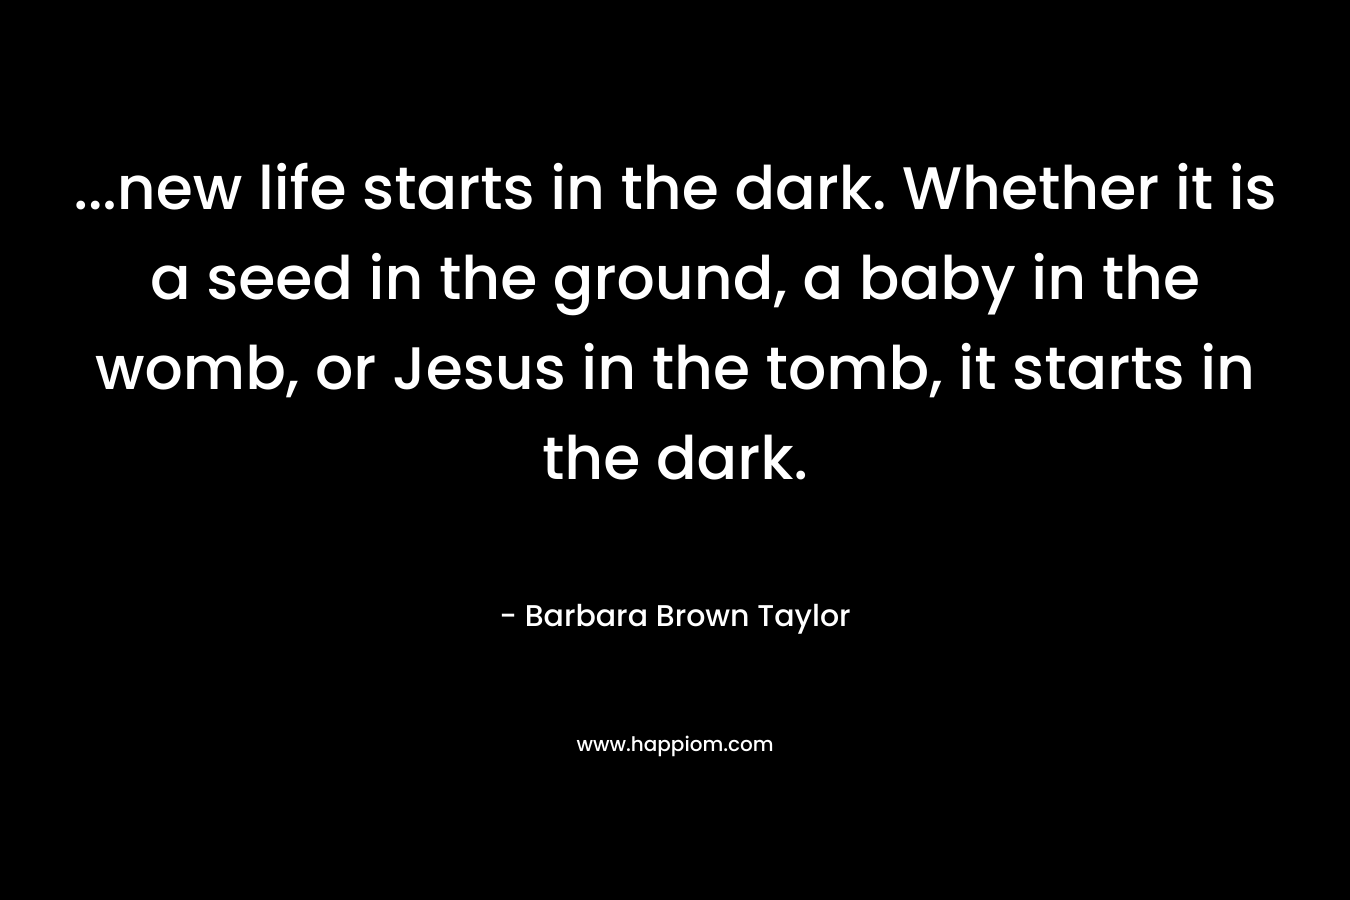 …new life starts in the dark. Whether it is a seed in the ground, a baby in the womb, or Jesus in the tomb, it starts in the dark. – Barbara Brown Taylor